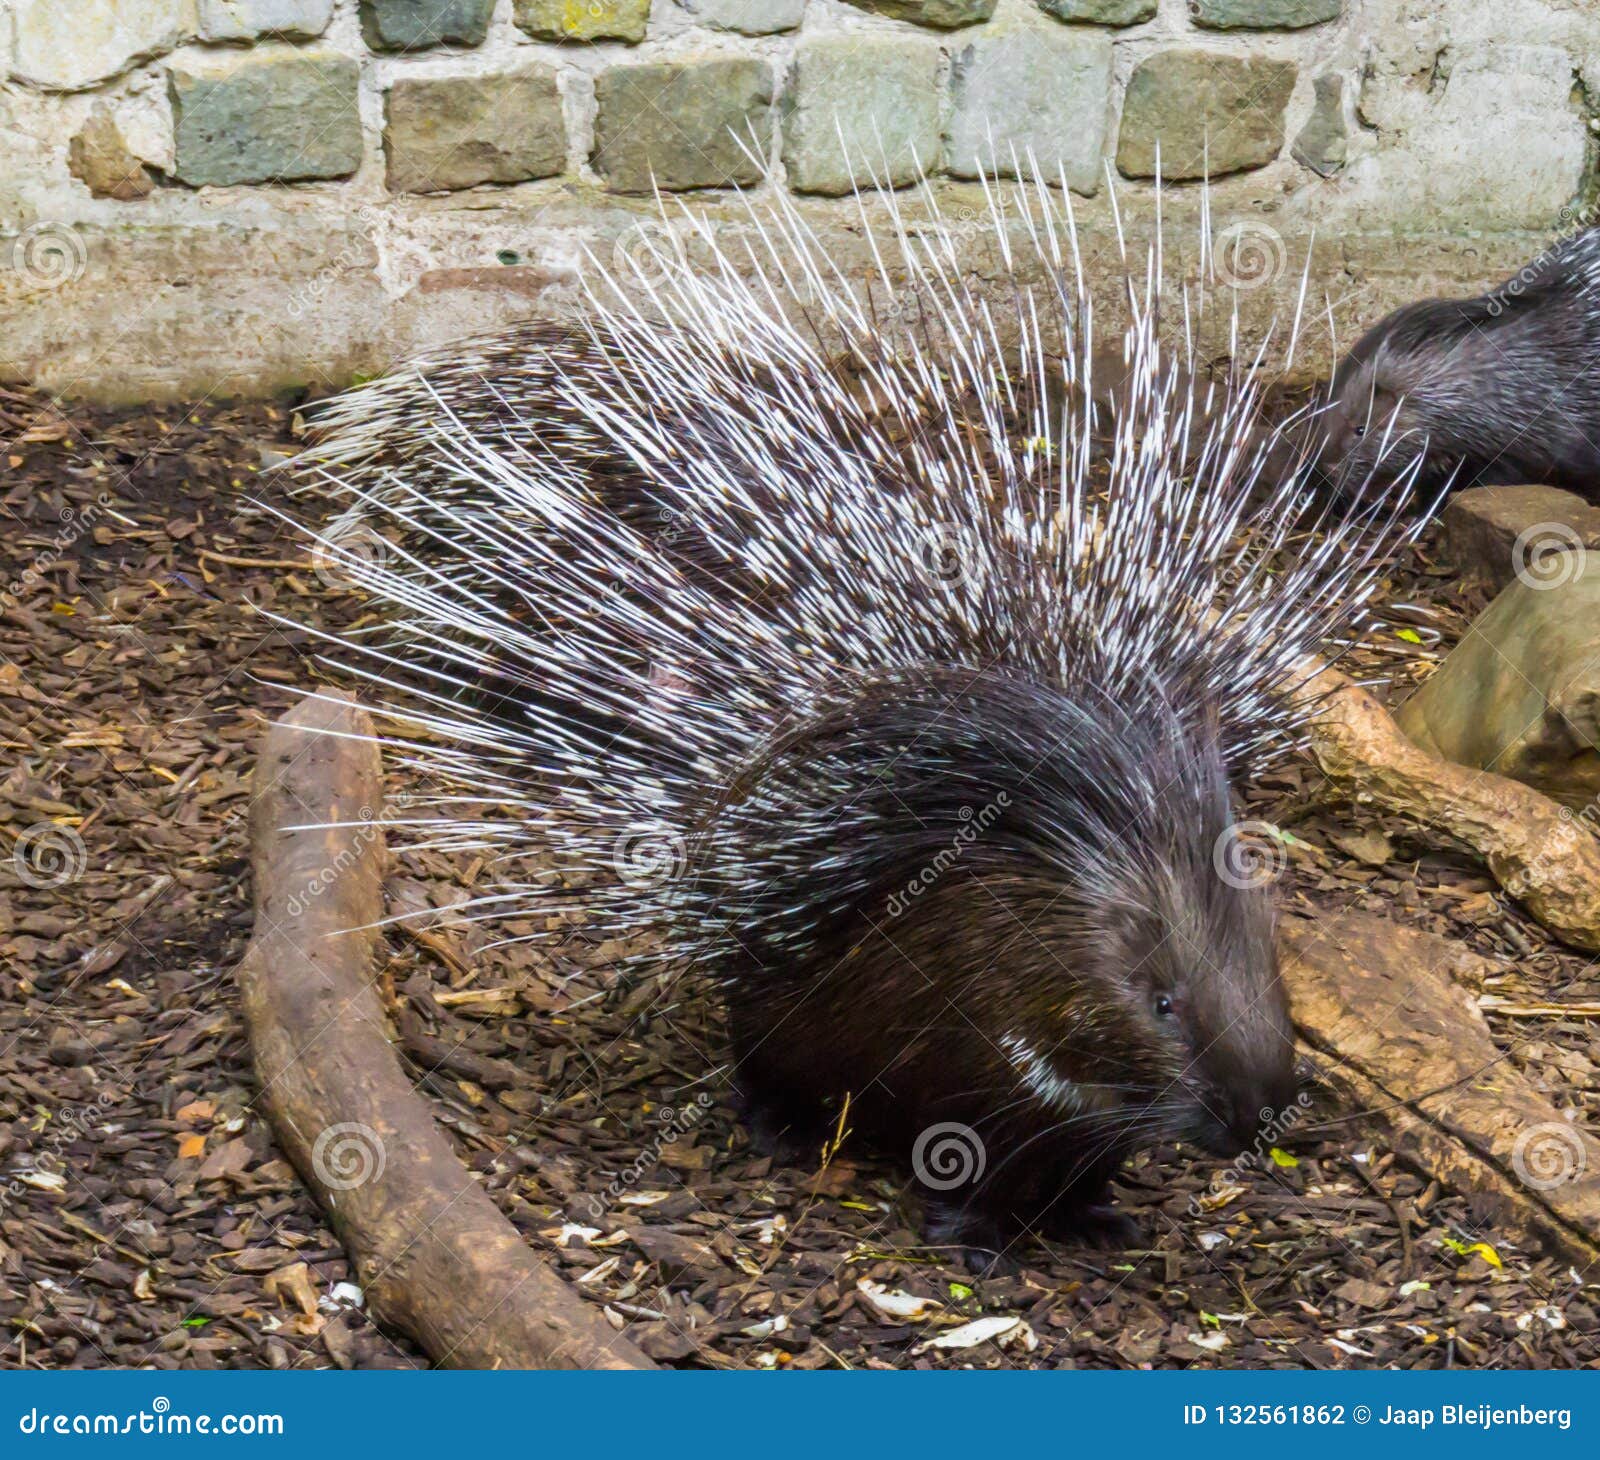 crested-porcupine-raising-spreading-its-quills-to-defend-child-defensive-threatening-pose-132561862.jpg